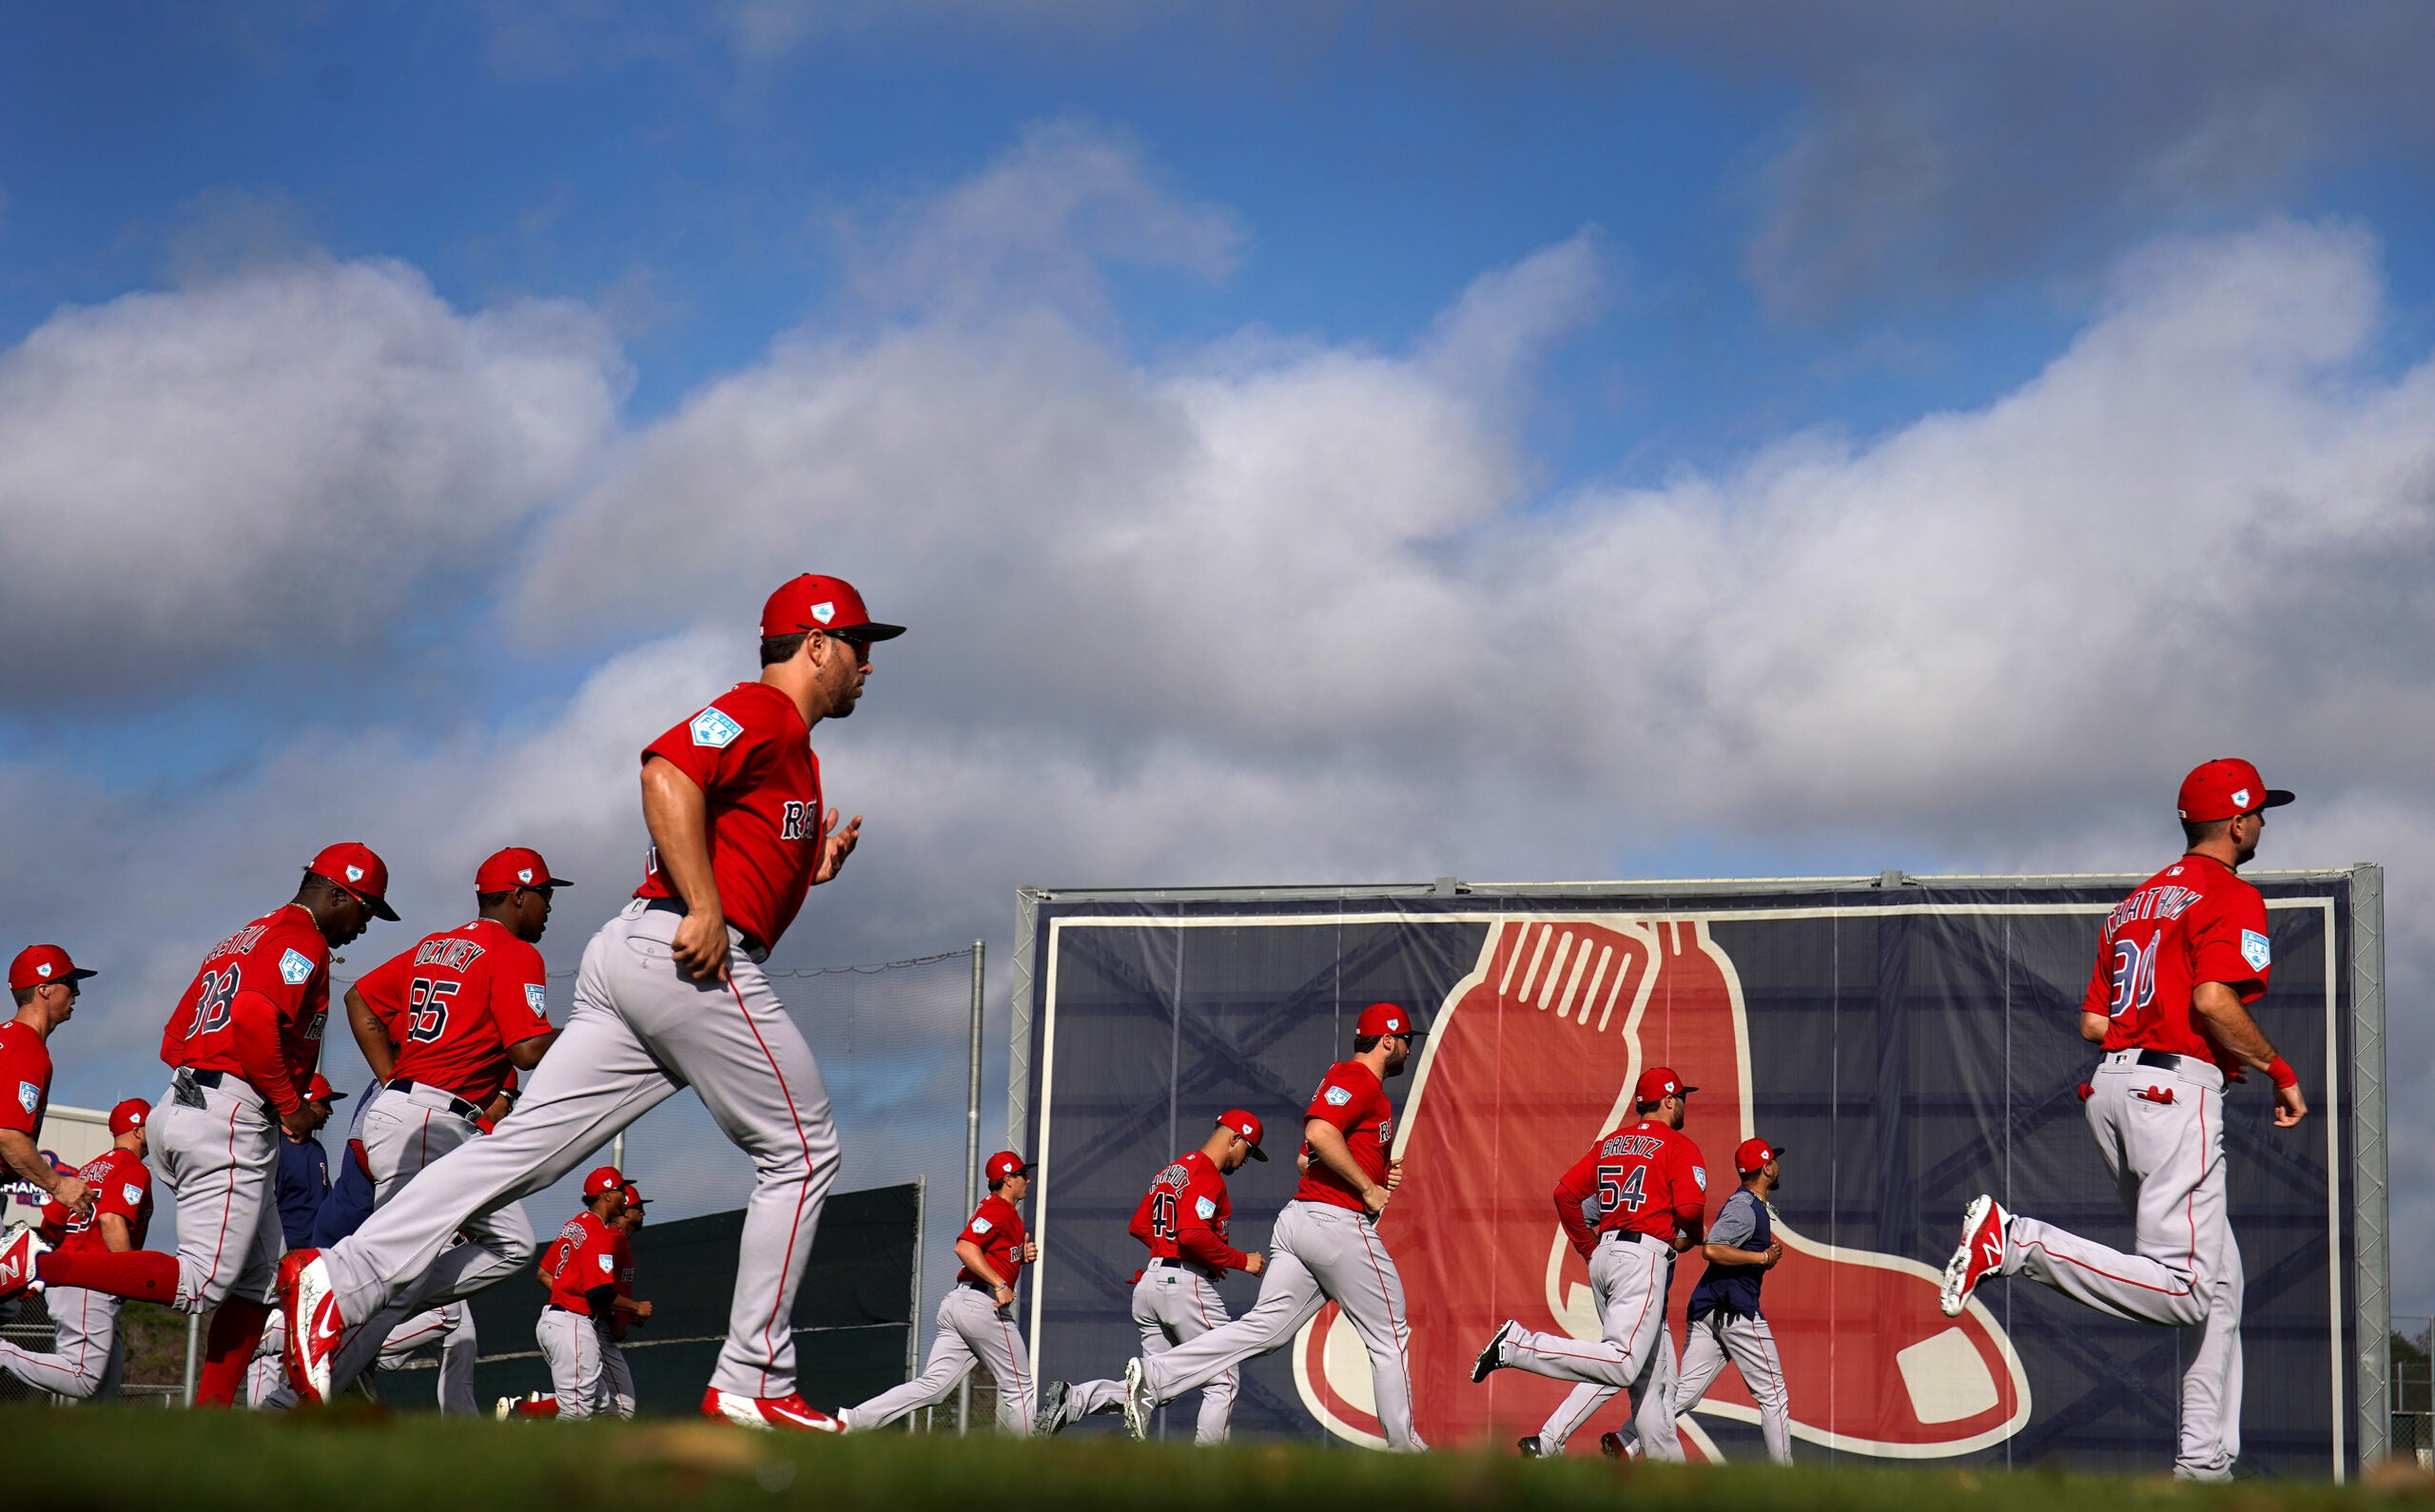 Red Sox to host open house at JetBlue Park on Feb. 18